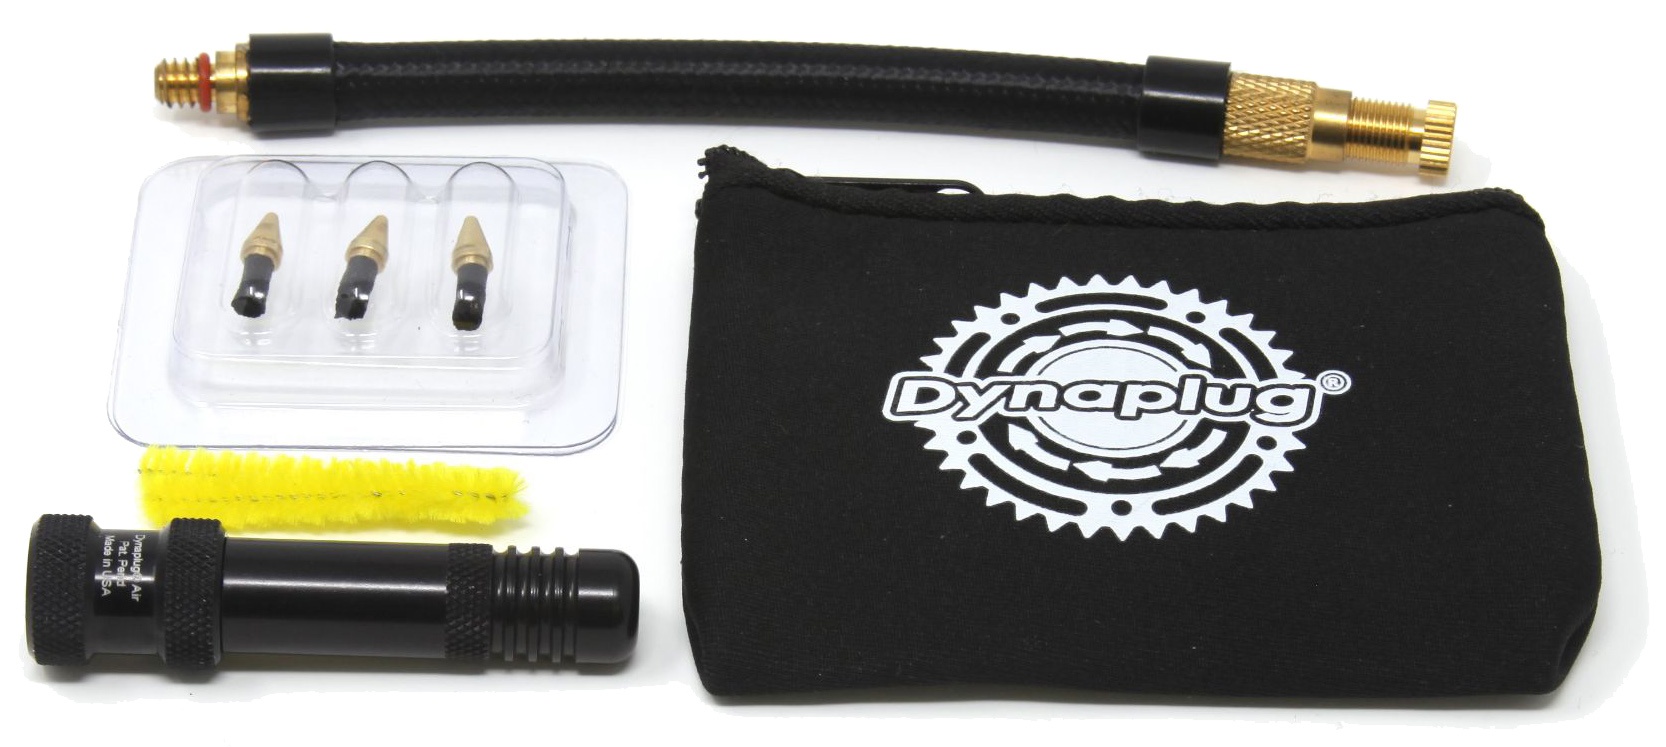 Reservedele - Tubeless - Dynaplug Air Tubeless Road Tyre Repair and Inflation kit - Sort